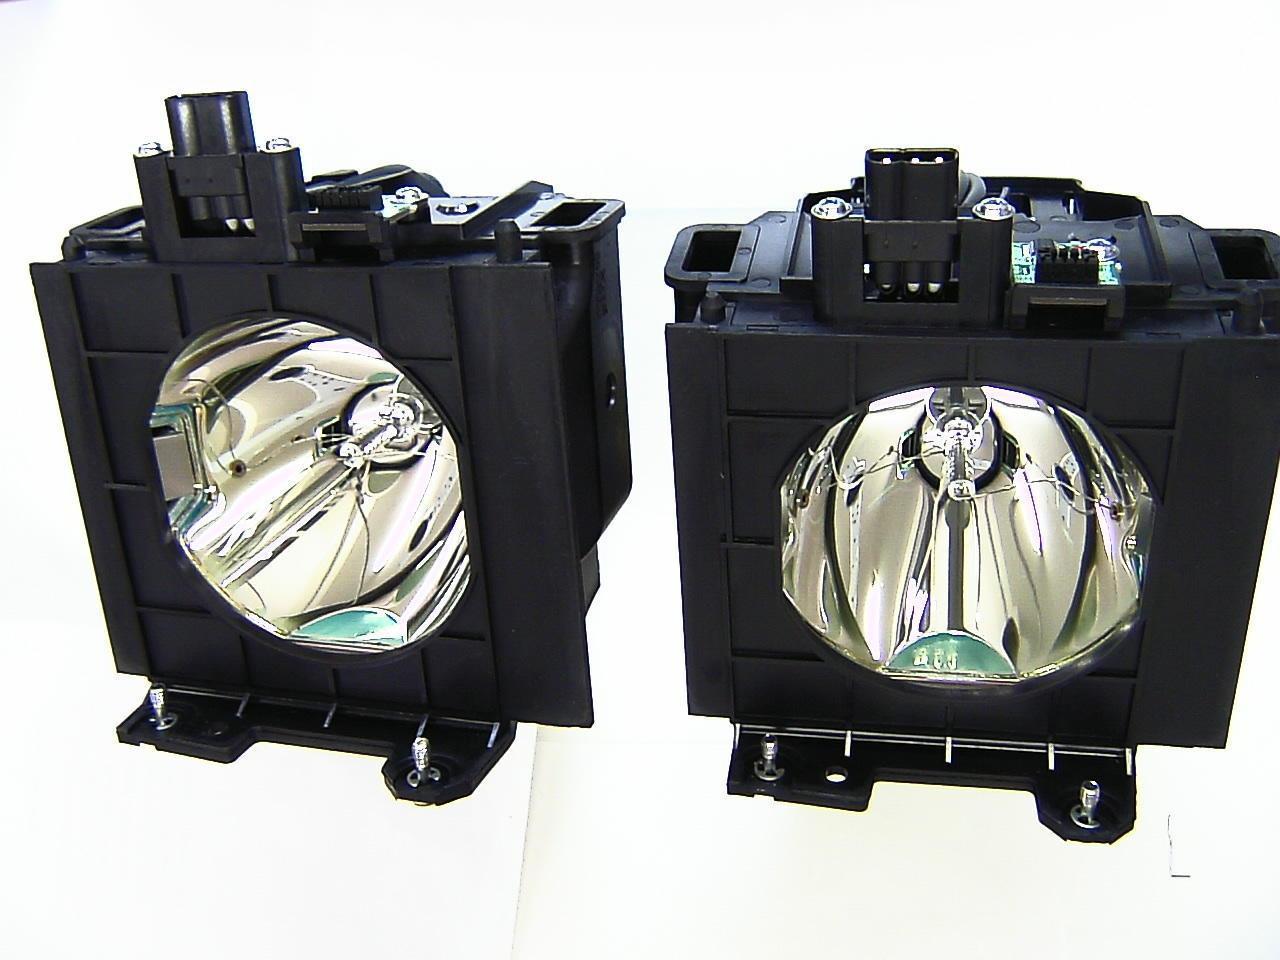 PTDW5100UL Panasonic Twin-Pack Projector Lamp Replacement (contains two lamps). Projector Lamp Assembly with High Quality OEM C